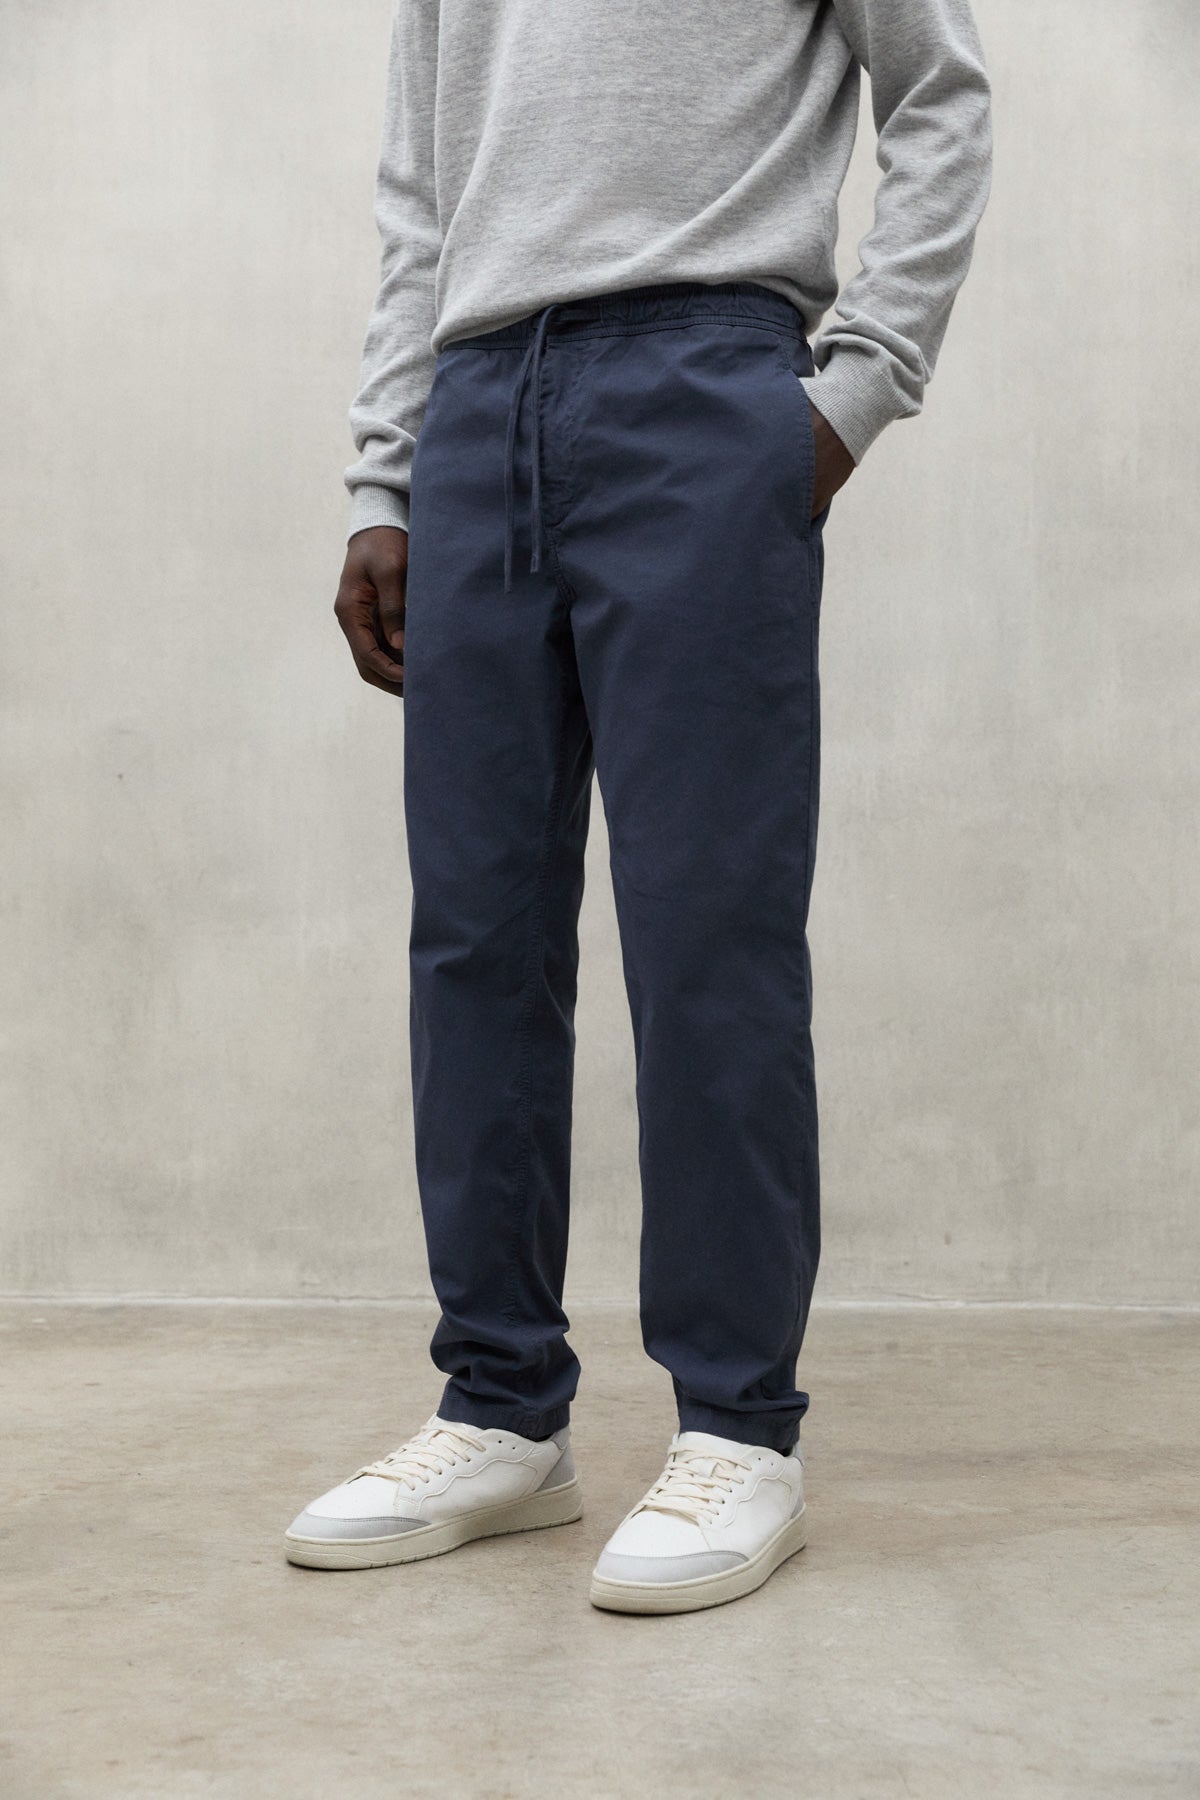 NAVY BLUE ETHICA TROUSERS